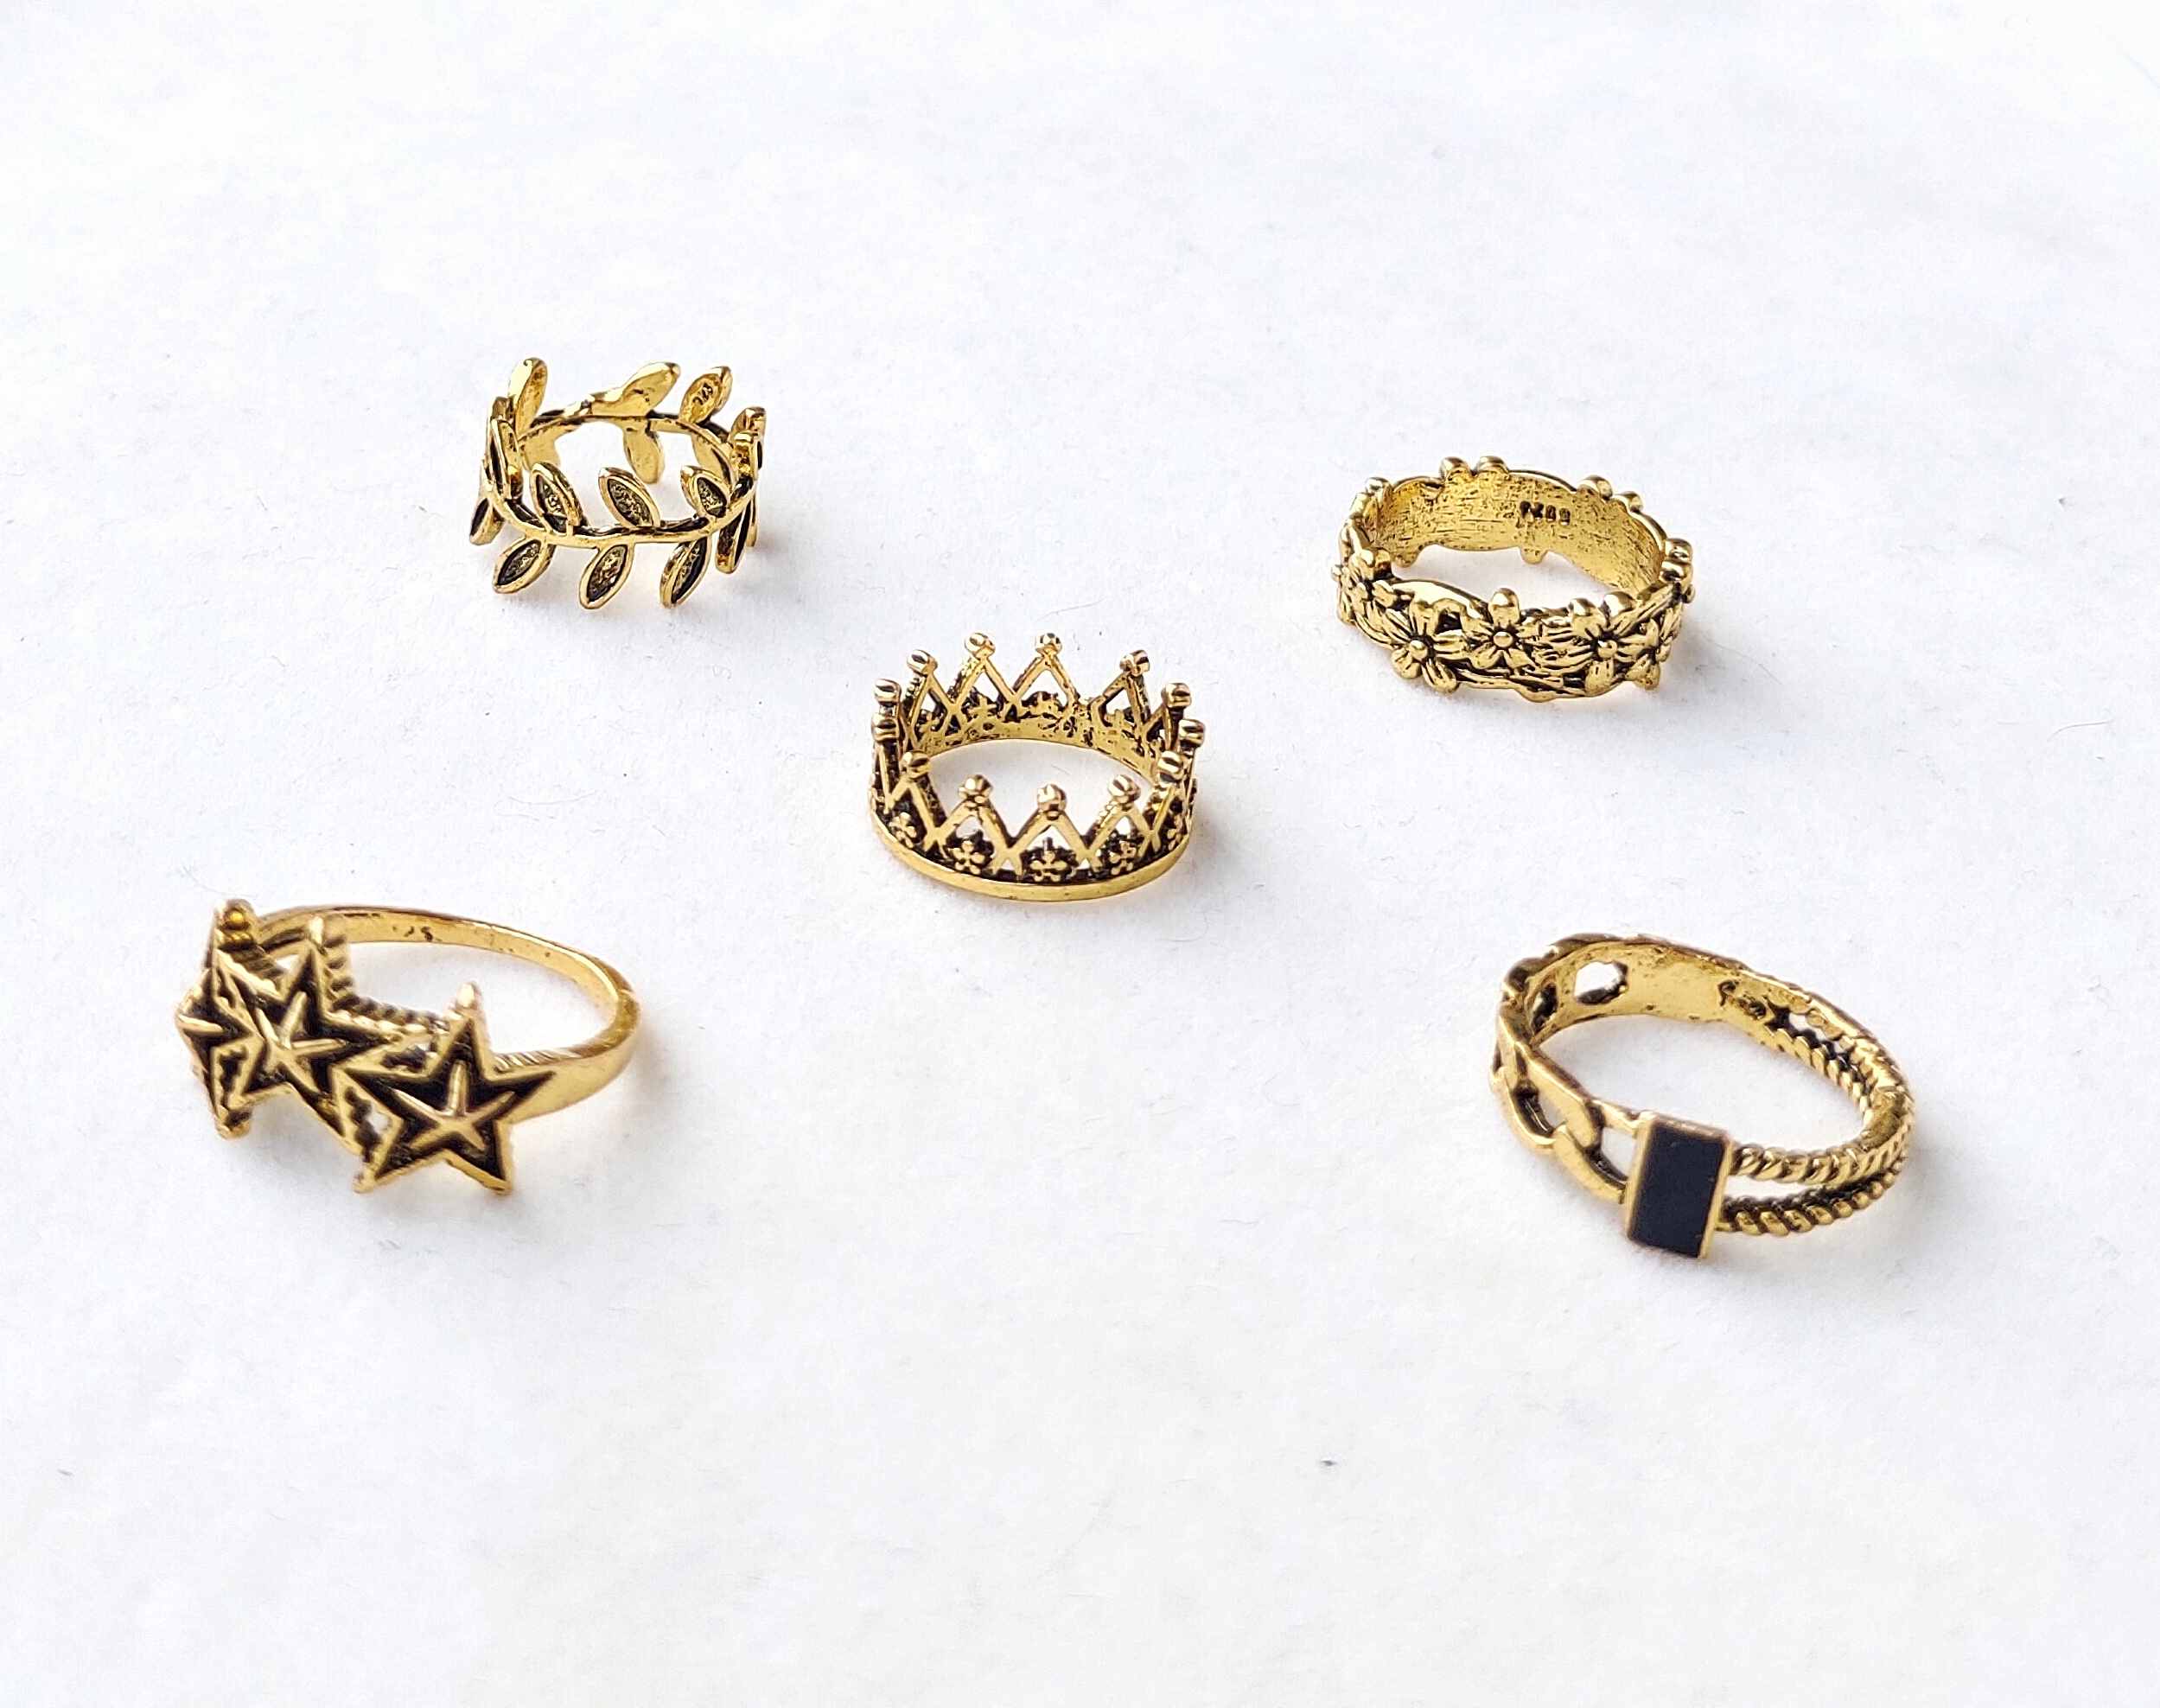 Latest Designs Of Gold Rings For Womens | gold Finger Ring Designs For  Ladies With Stones | T.F. | Gold ring designs, Ring designs, Gold finger  rings